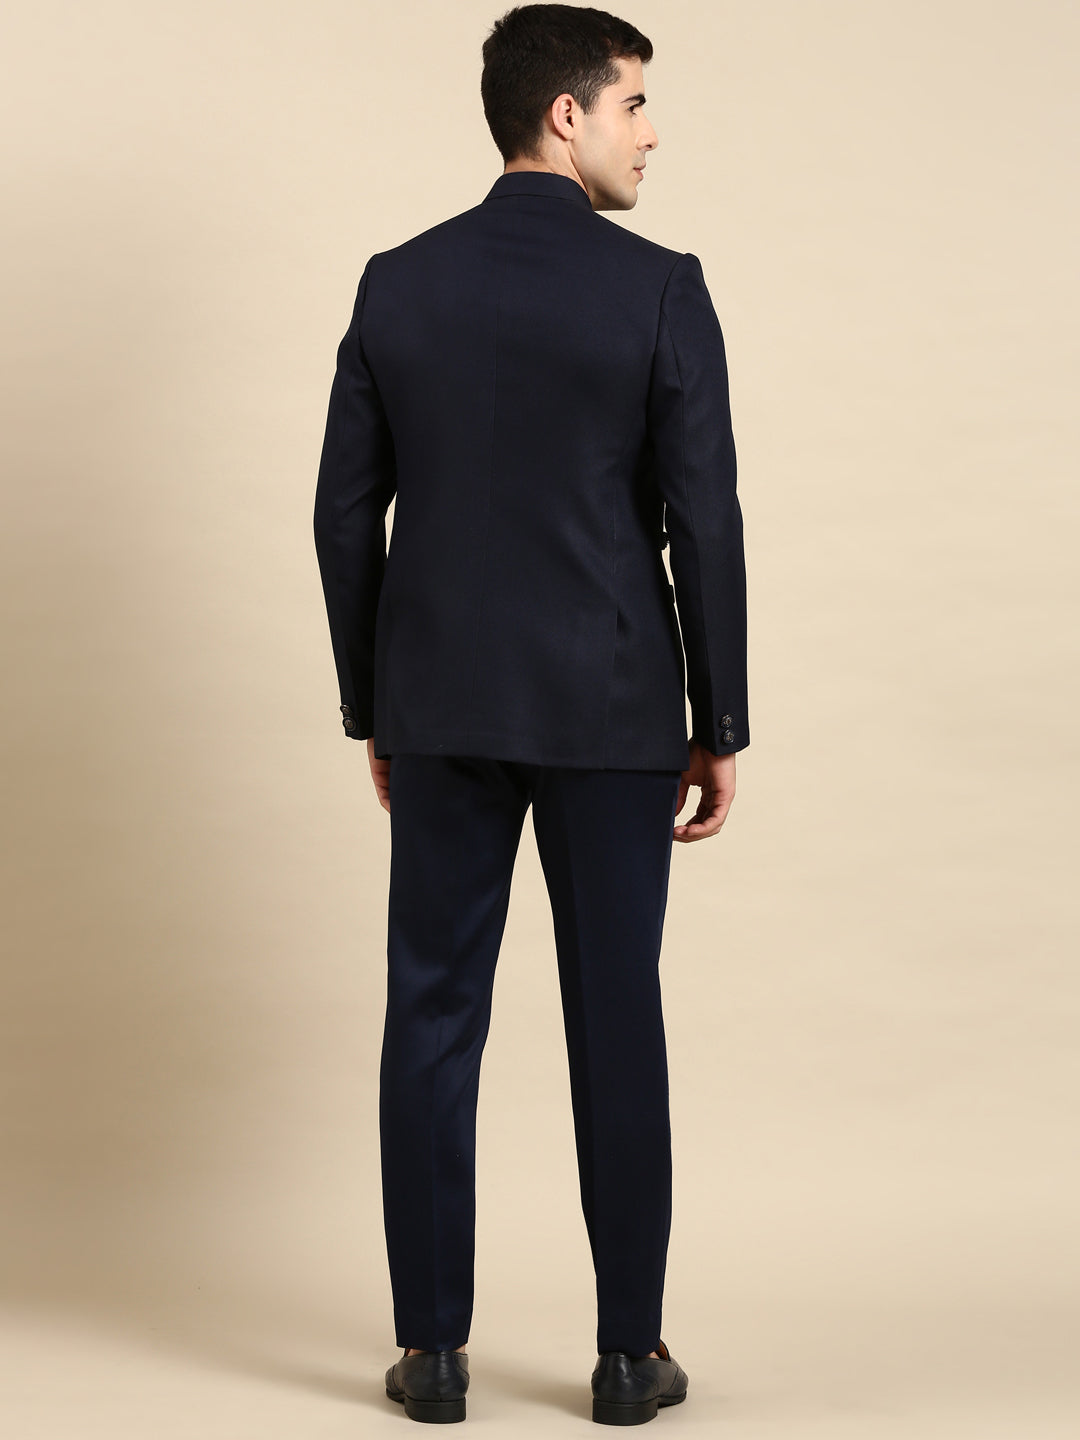 Navy Embroidered Bandhgala with velvet Detailing